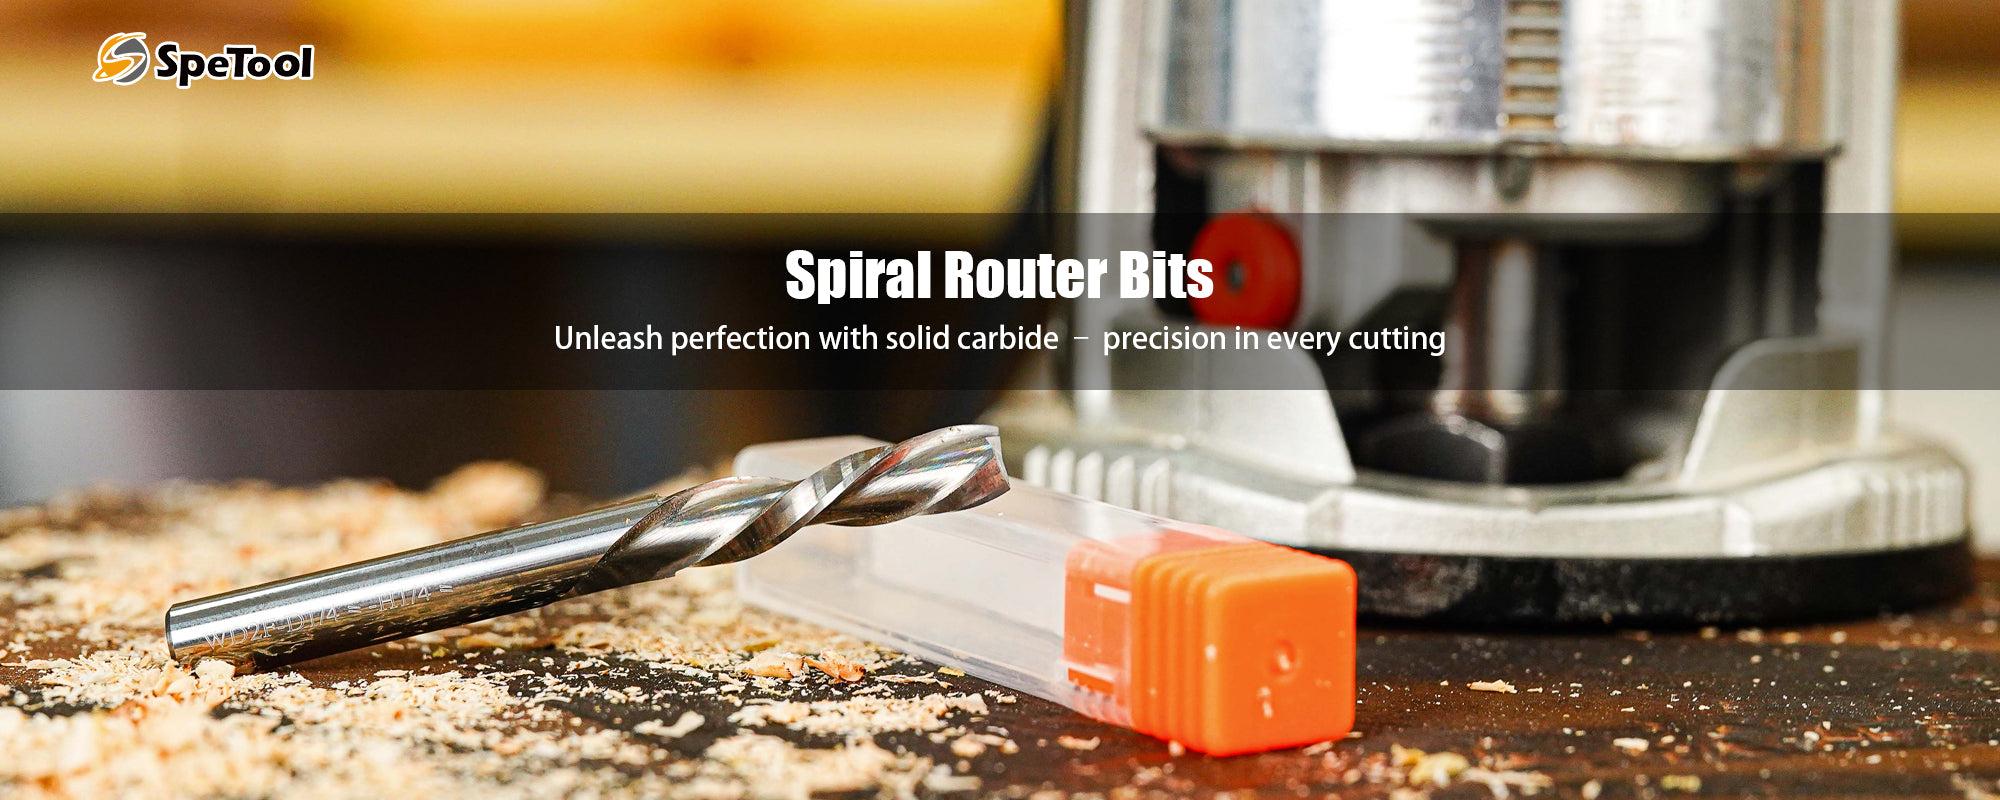 SpeTool spiral router bits